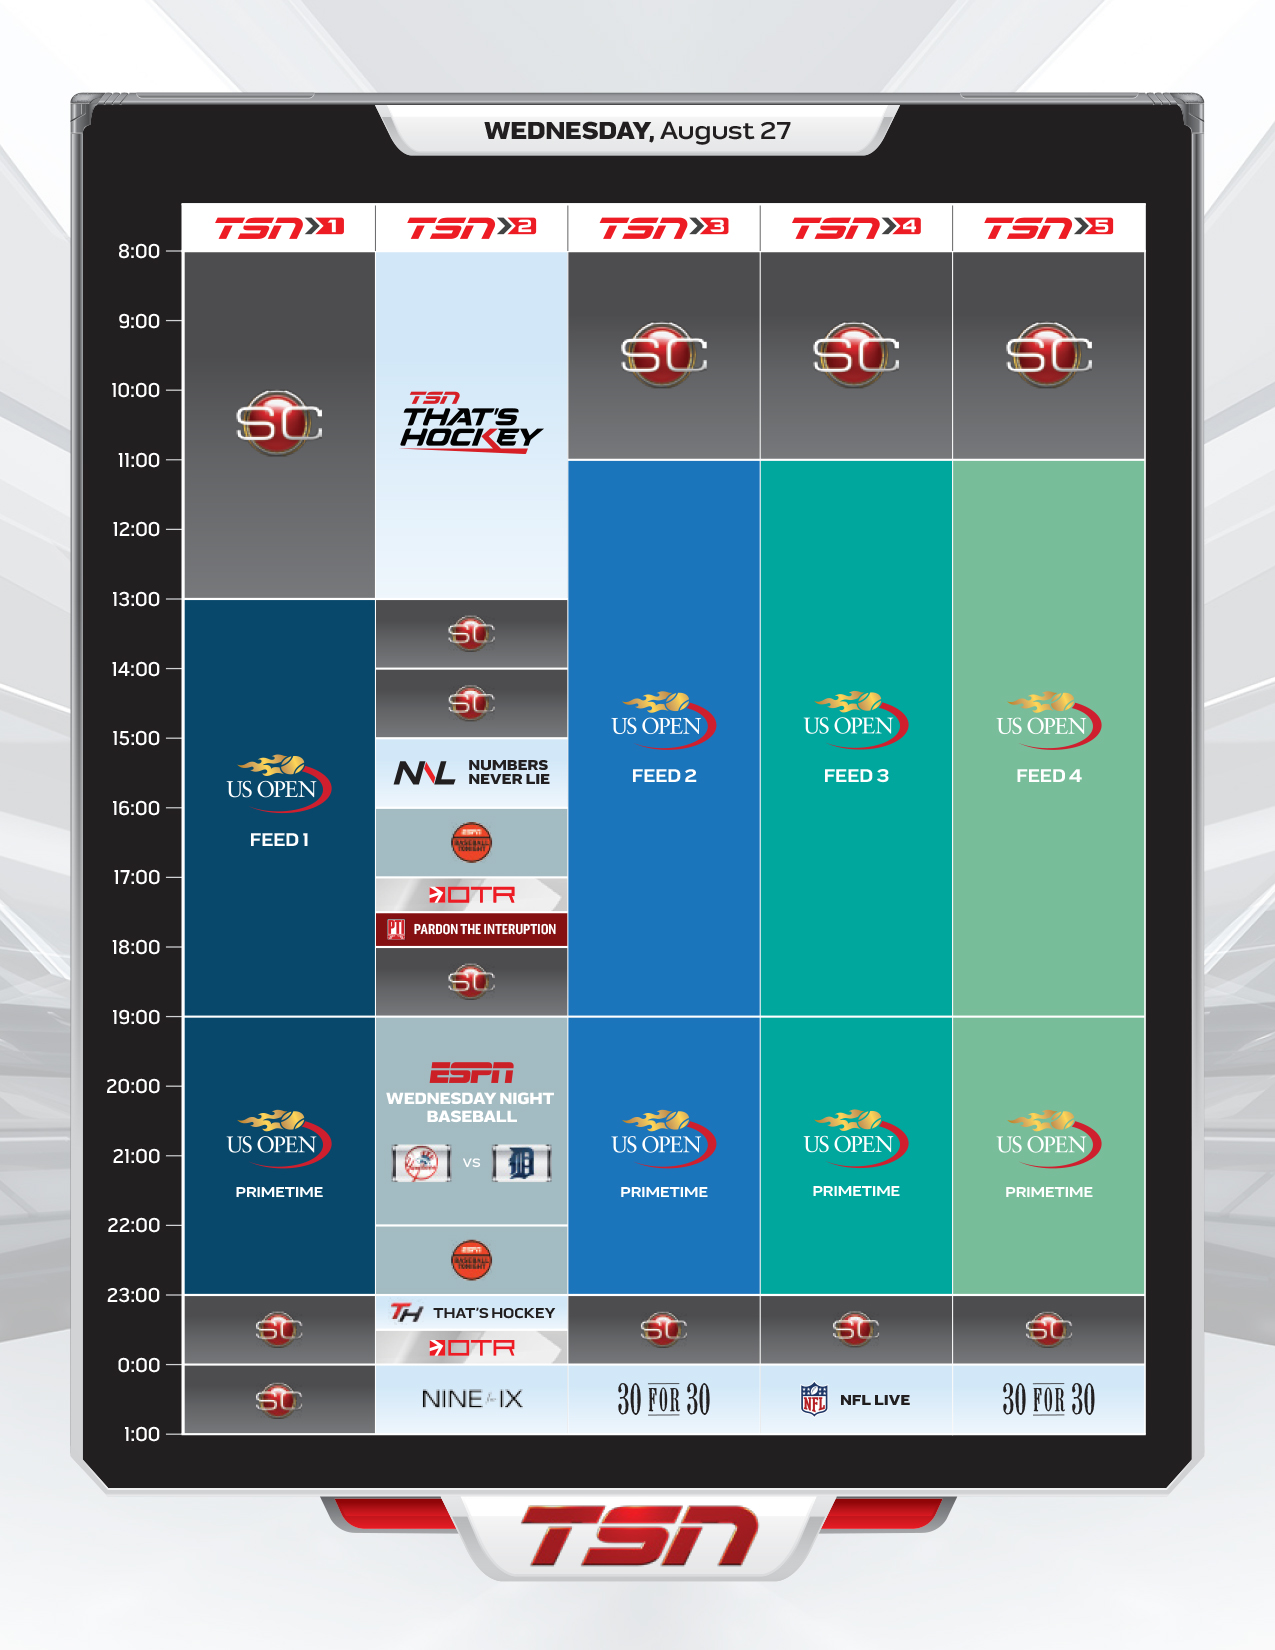 TSN New Channel Placement and First Week Schedule